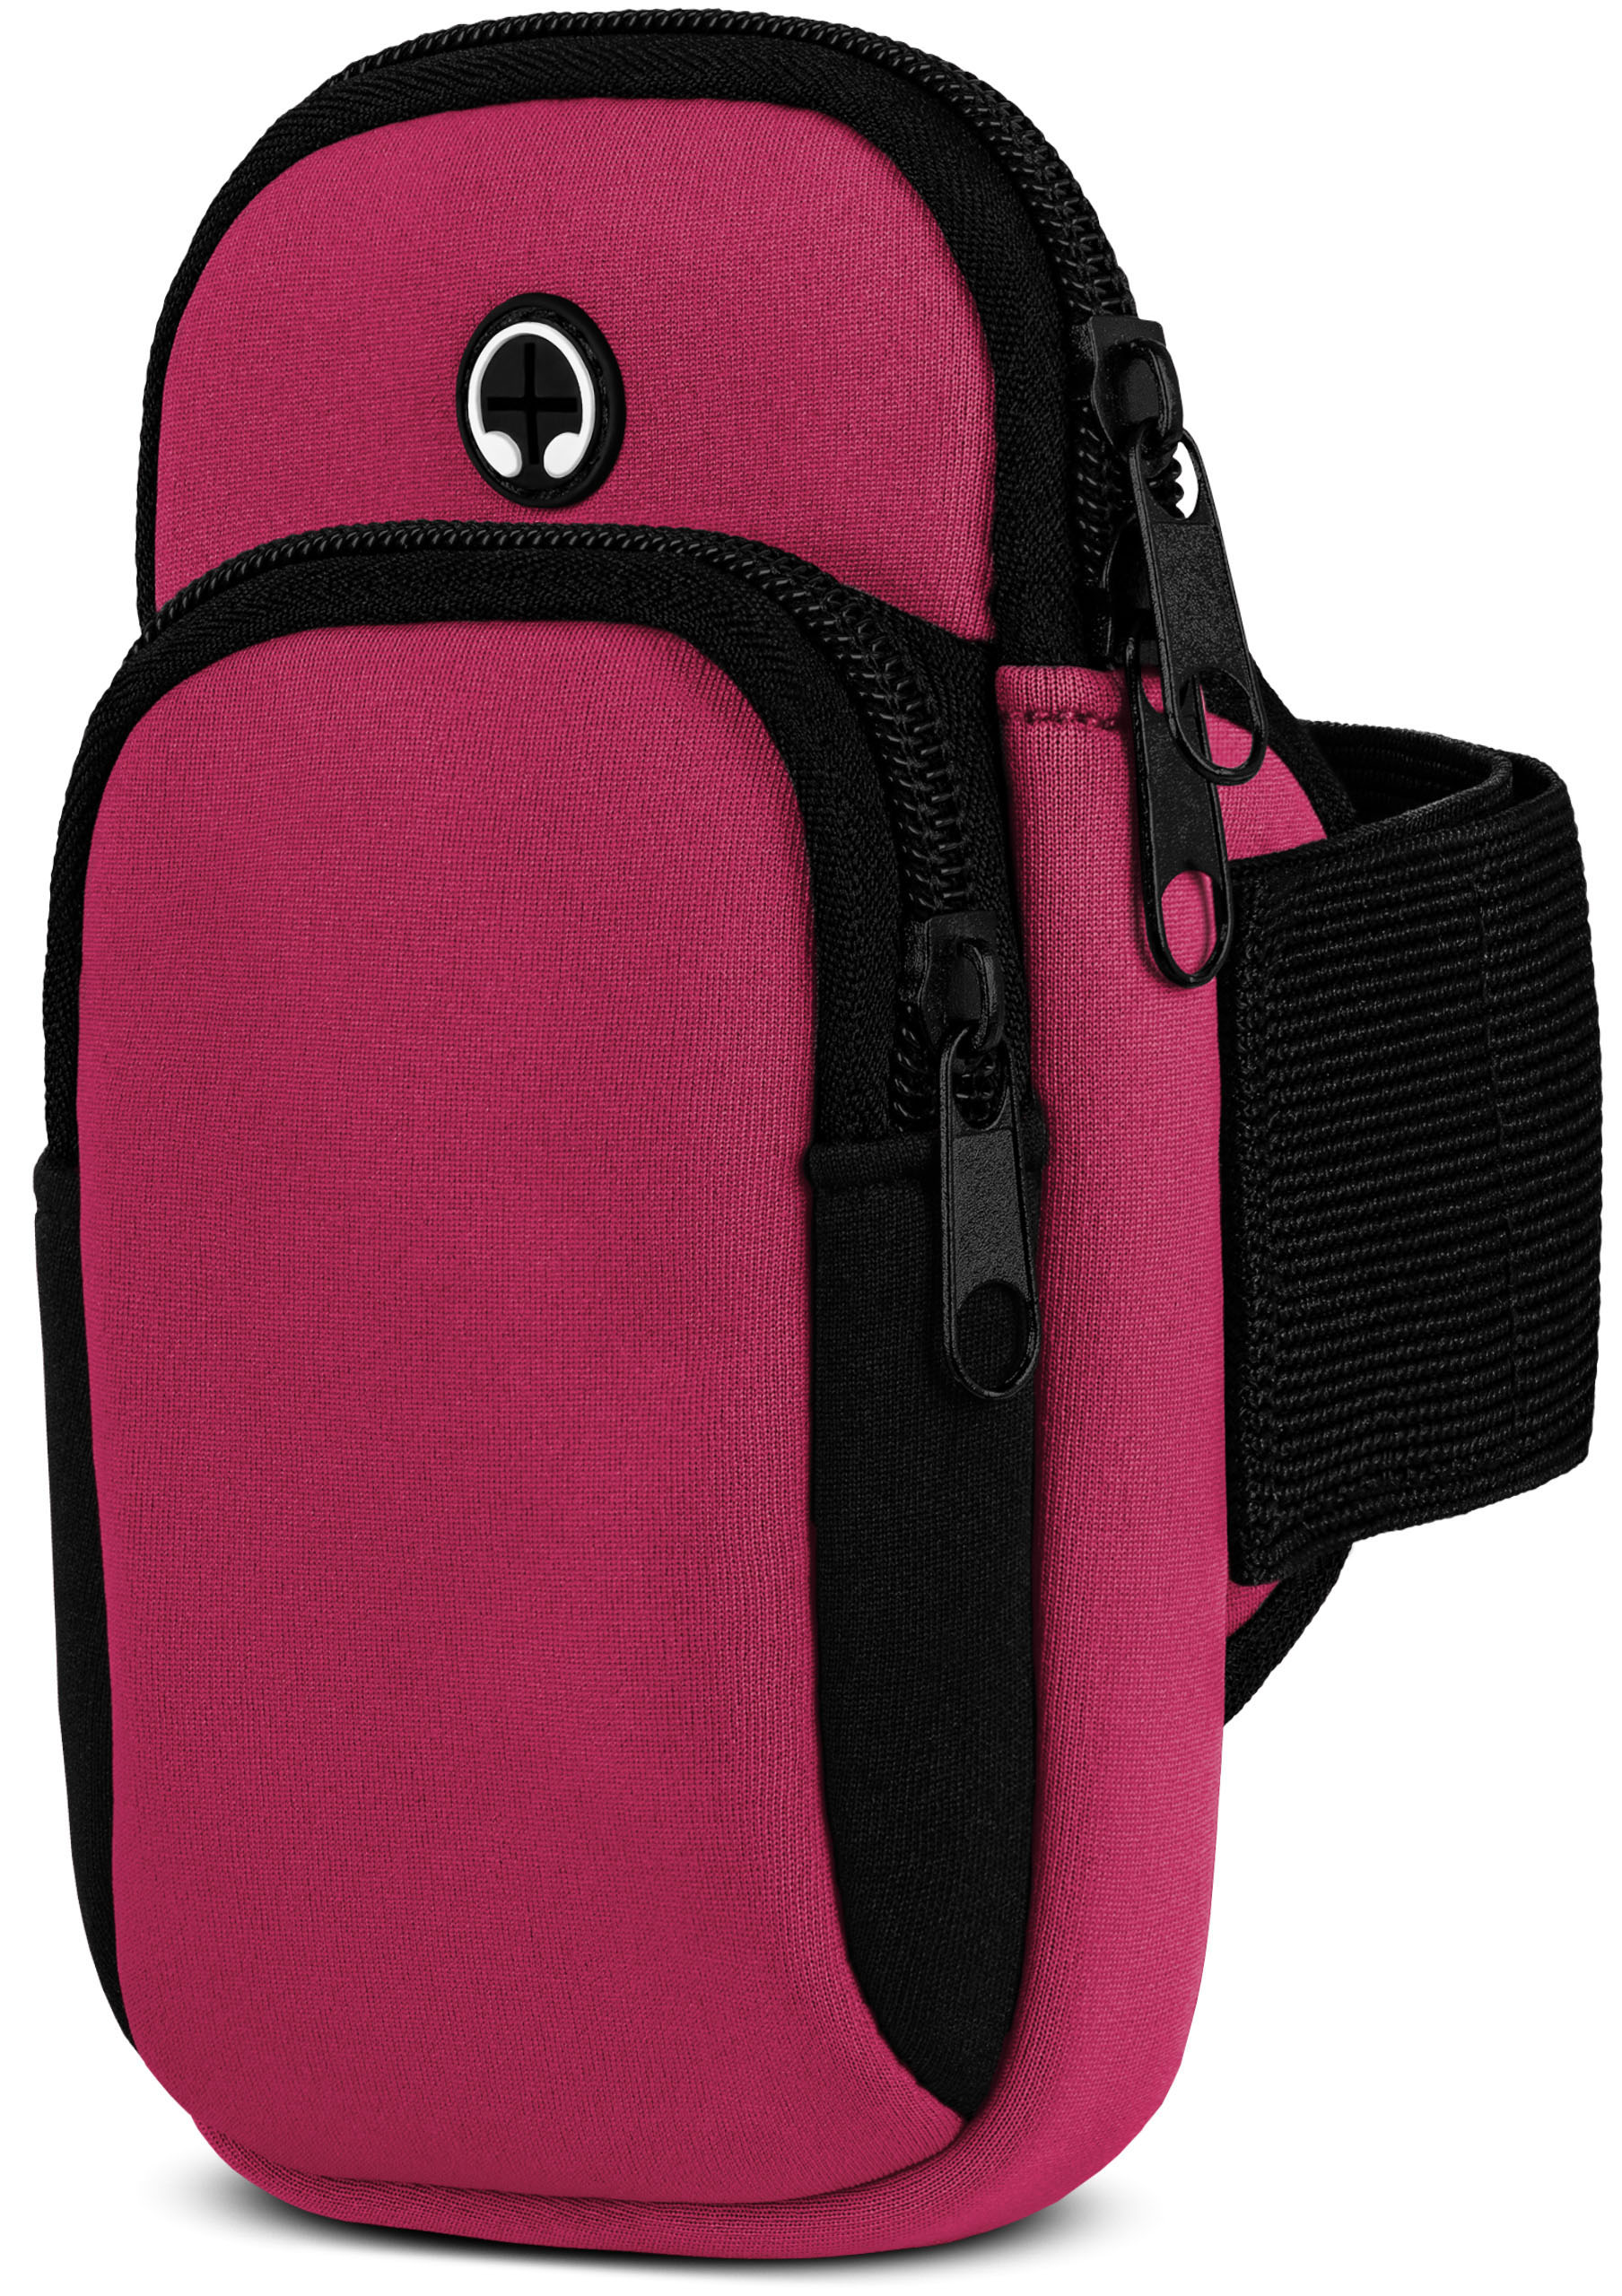 One Vision, Cover, Motorola, Full Armband, Pink MOEX Sport